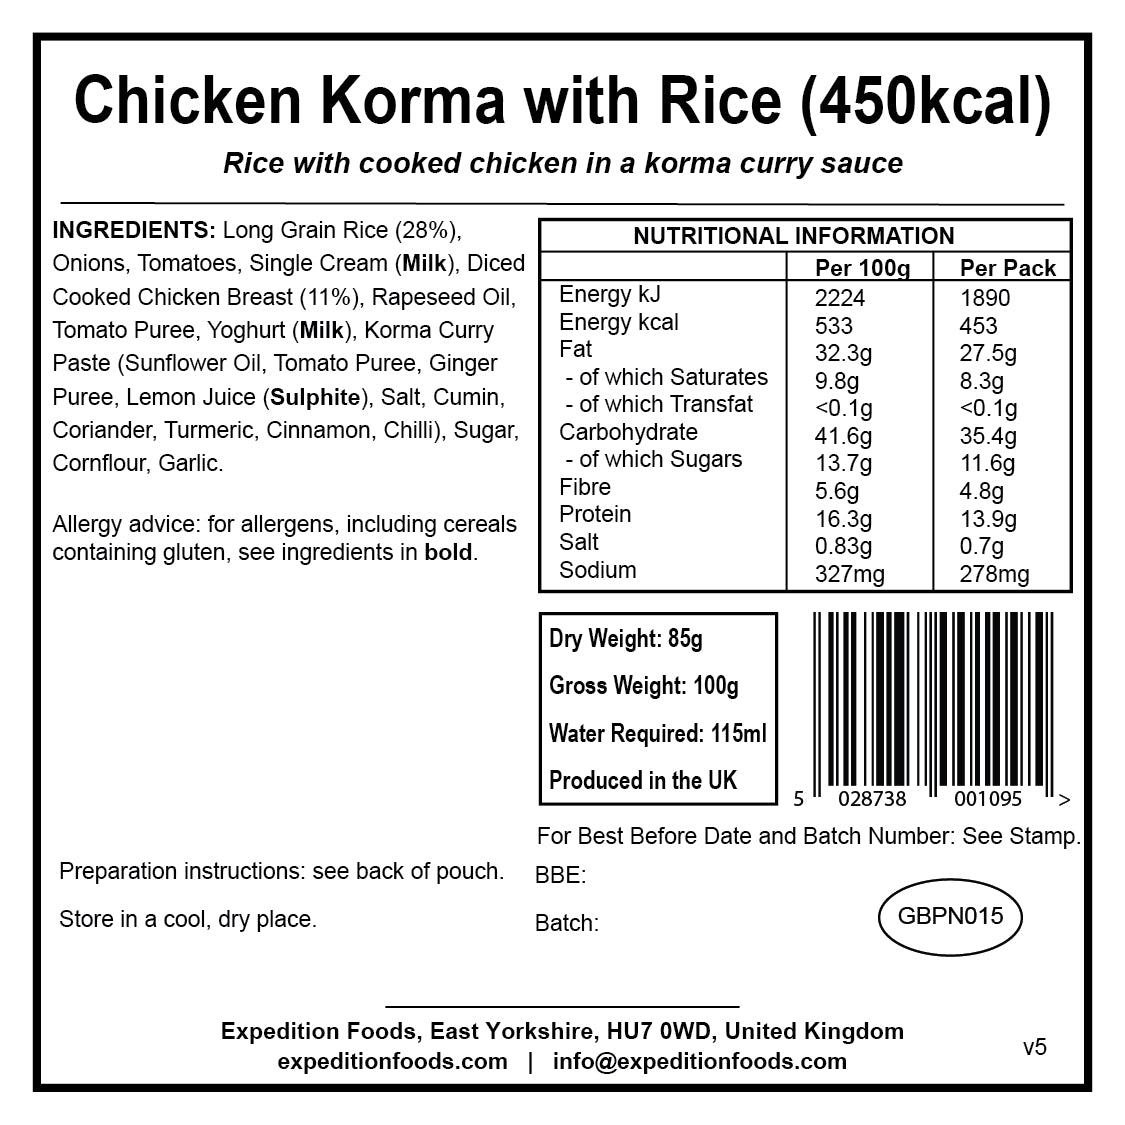 Expedition Foods Chicken Korma with Rice (450kcal)